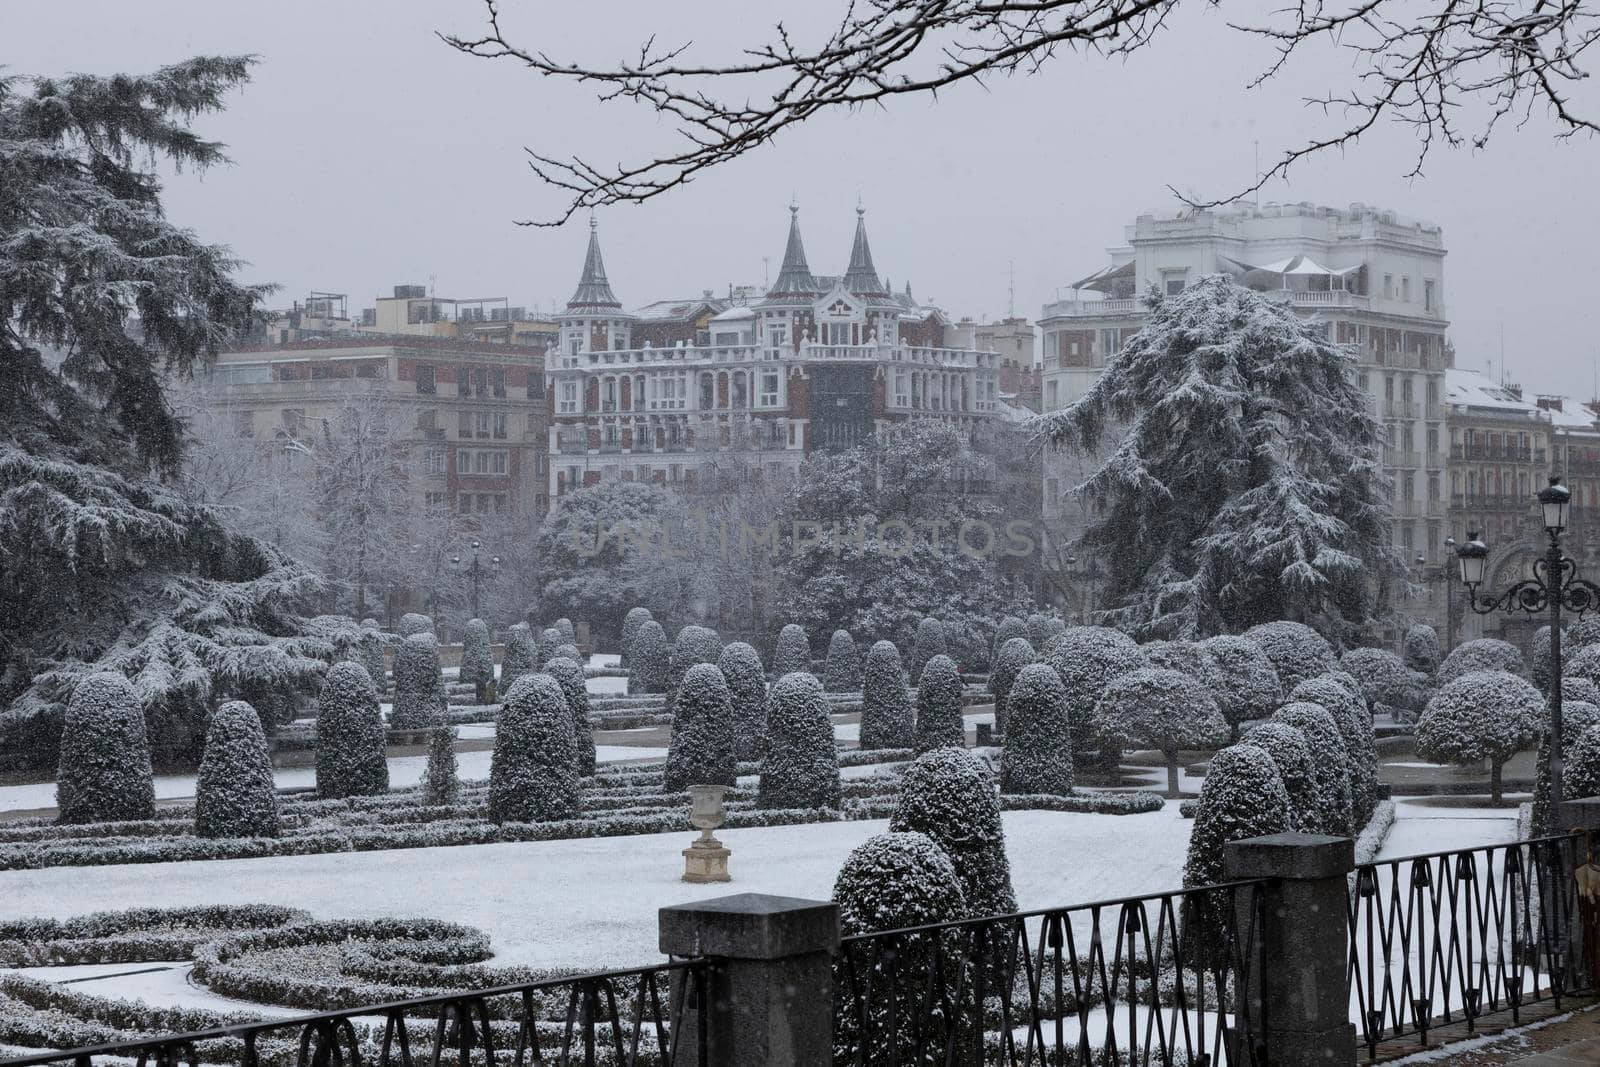 Madrid, Spain - January 07, 2021: General view of the Parterre gardens, in the Buen Retiro park in Madrid, in the middle of a snowy day, due to a wave of polar cold.